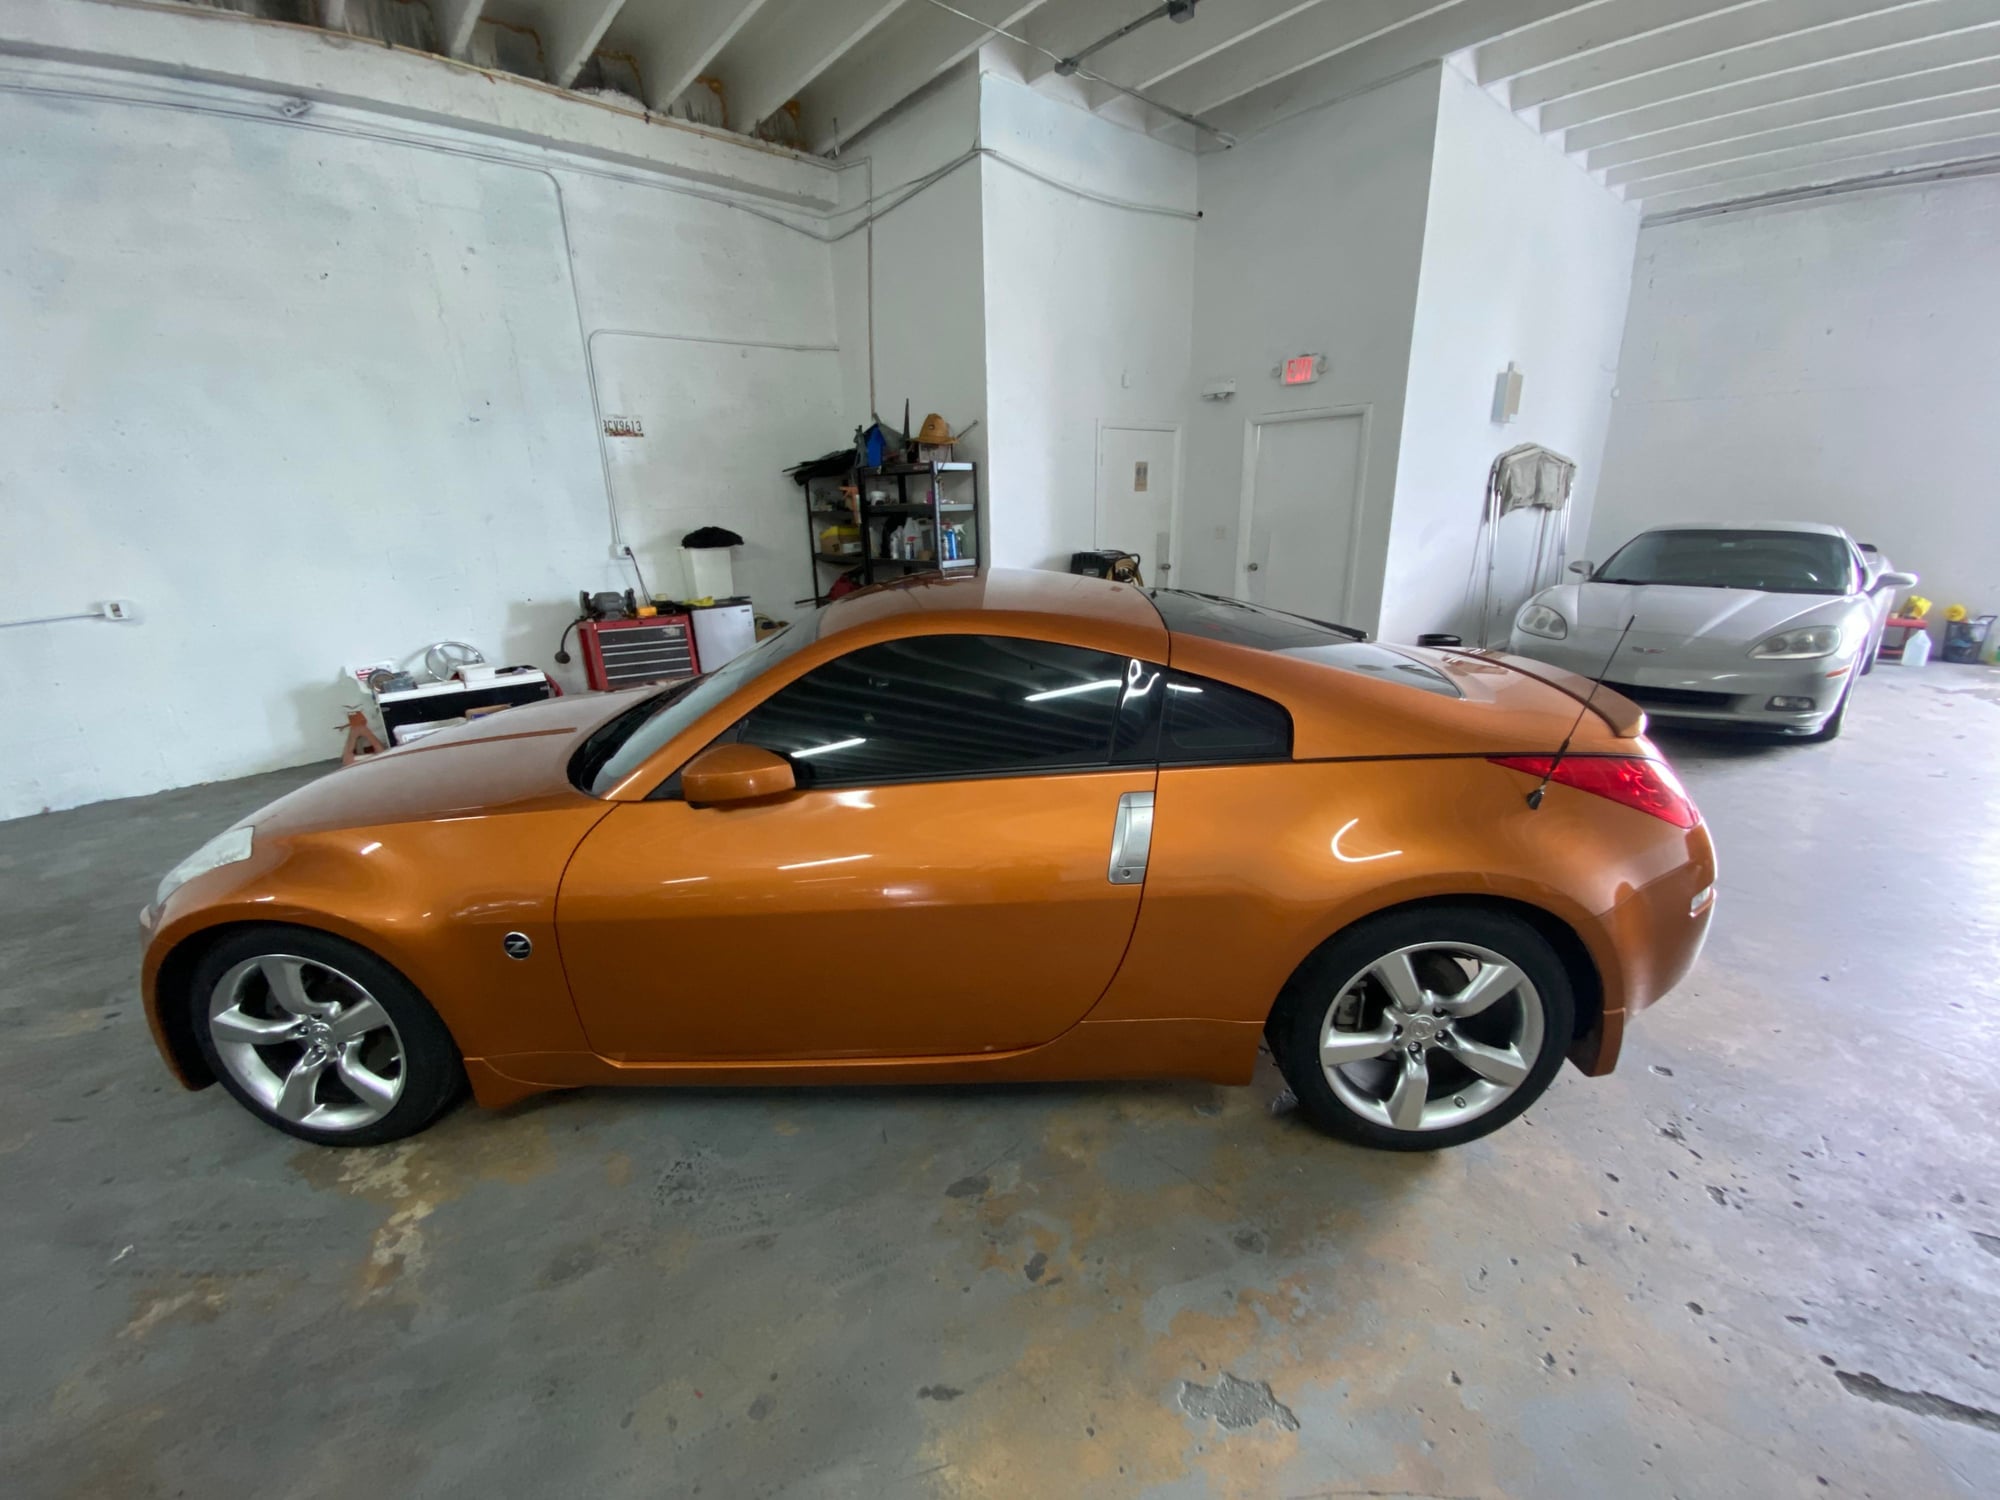 2006 Nissan 350Z - Ryan - Used - VIN 1j 654850765 - 25,000 Miles - 6 cyl - 2WD - Manual - Coupe - Other - Miami, FL 33196, United States